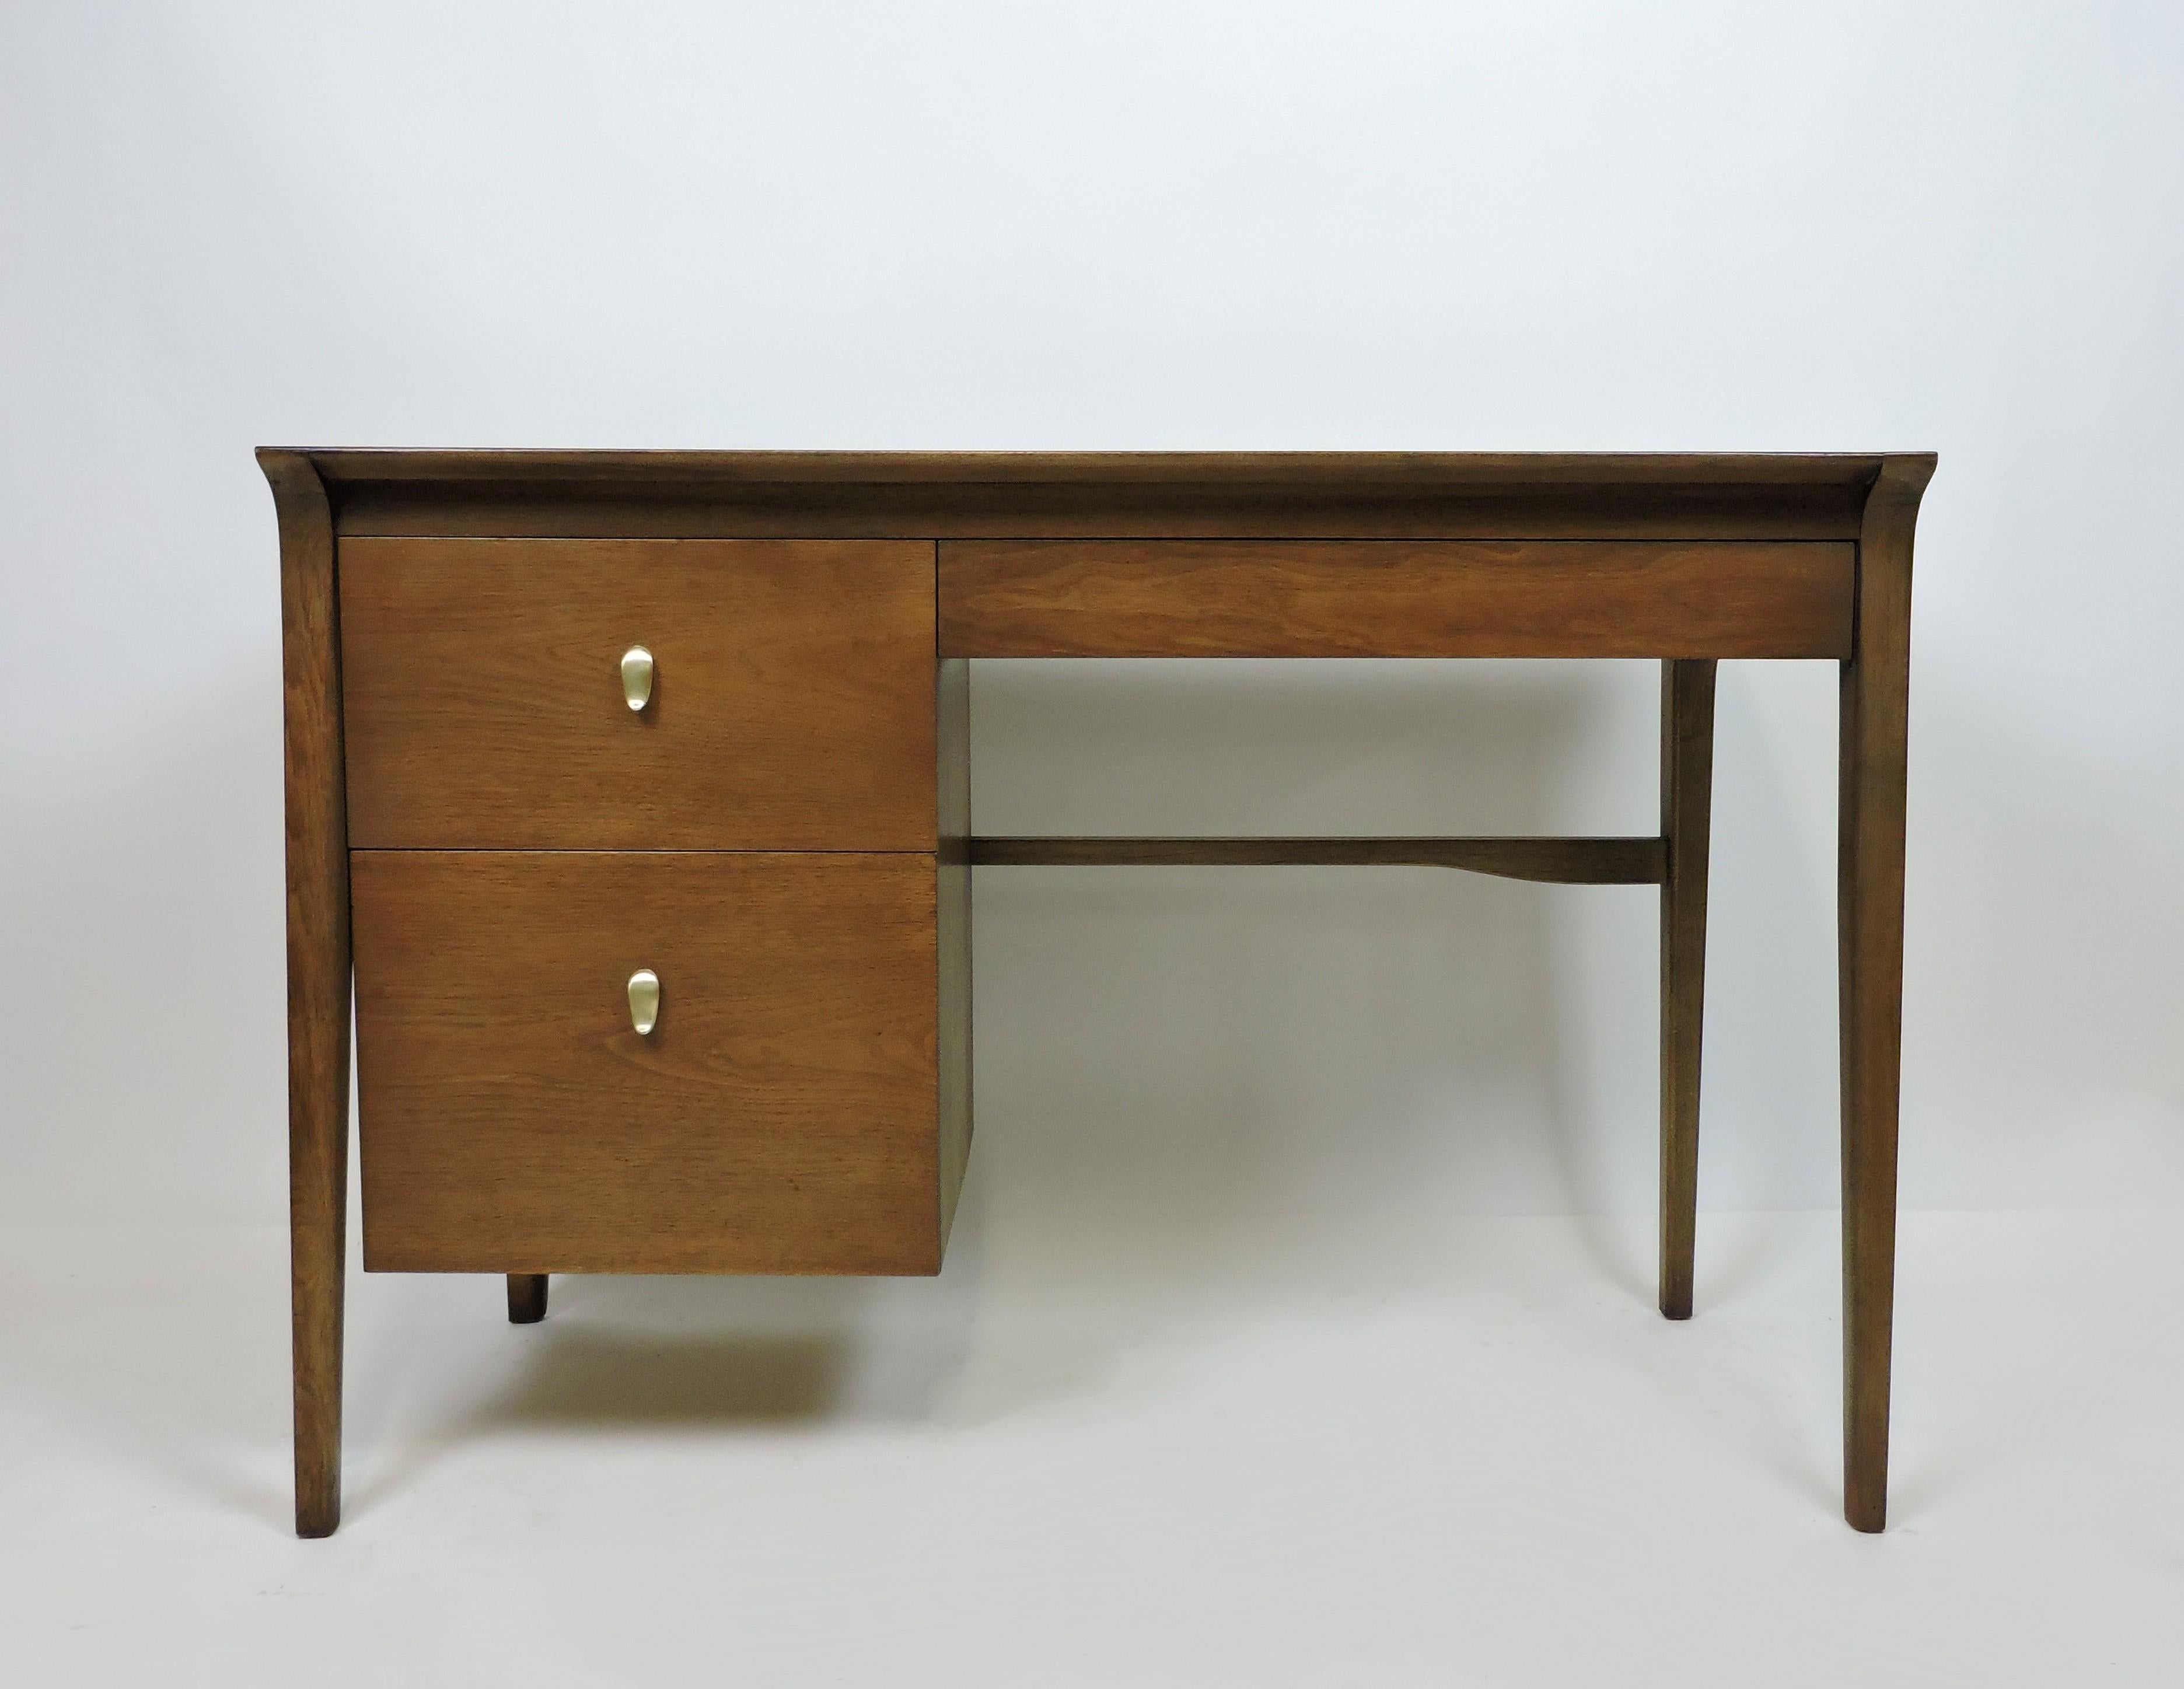 Elegant Mid-Century Modern K95 desk in walnut designed by John Van Koert for high quality furniture maker, Drexel. This desk has two large drawers on the left, and a smaller drawer on the right. The lower drawer has rails for hanging folders and the